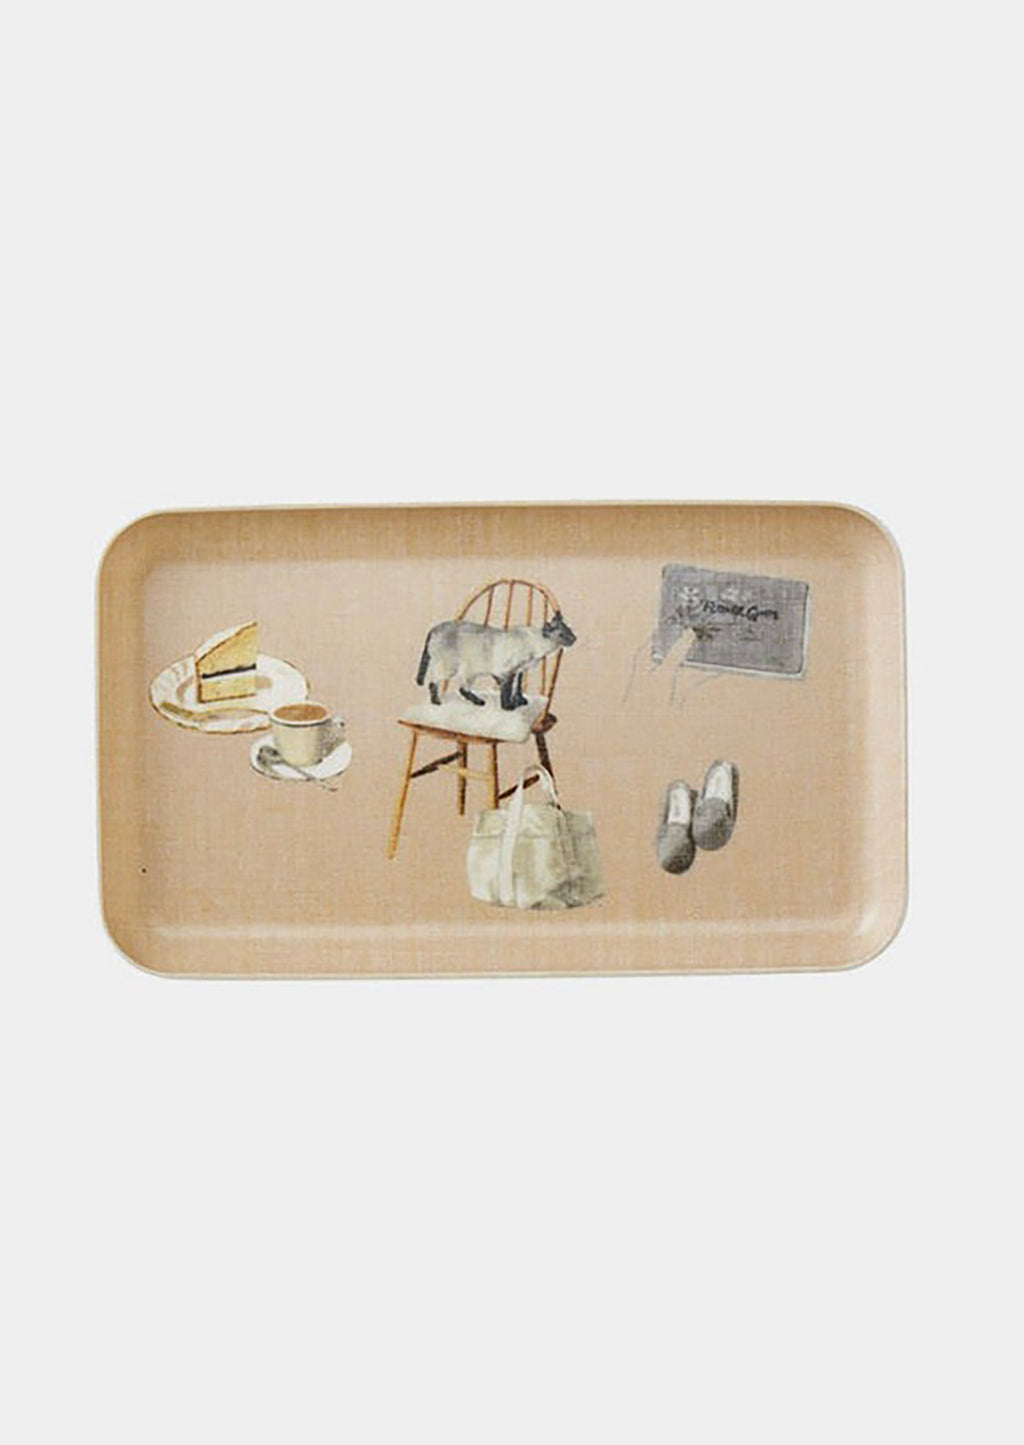 2: A rectangular tray with quirky cat print.